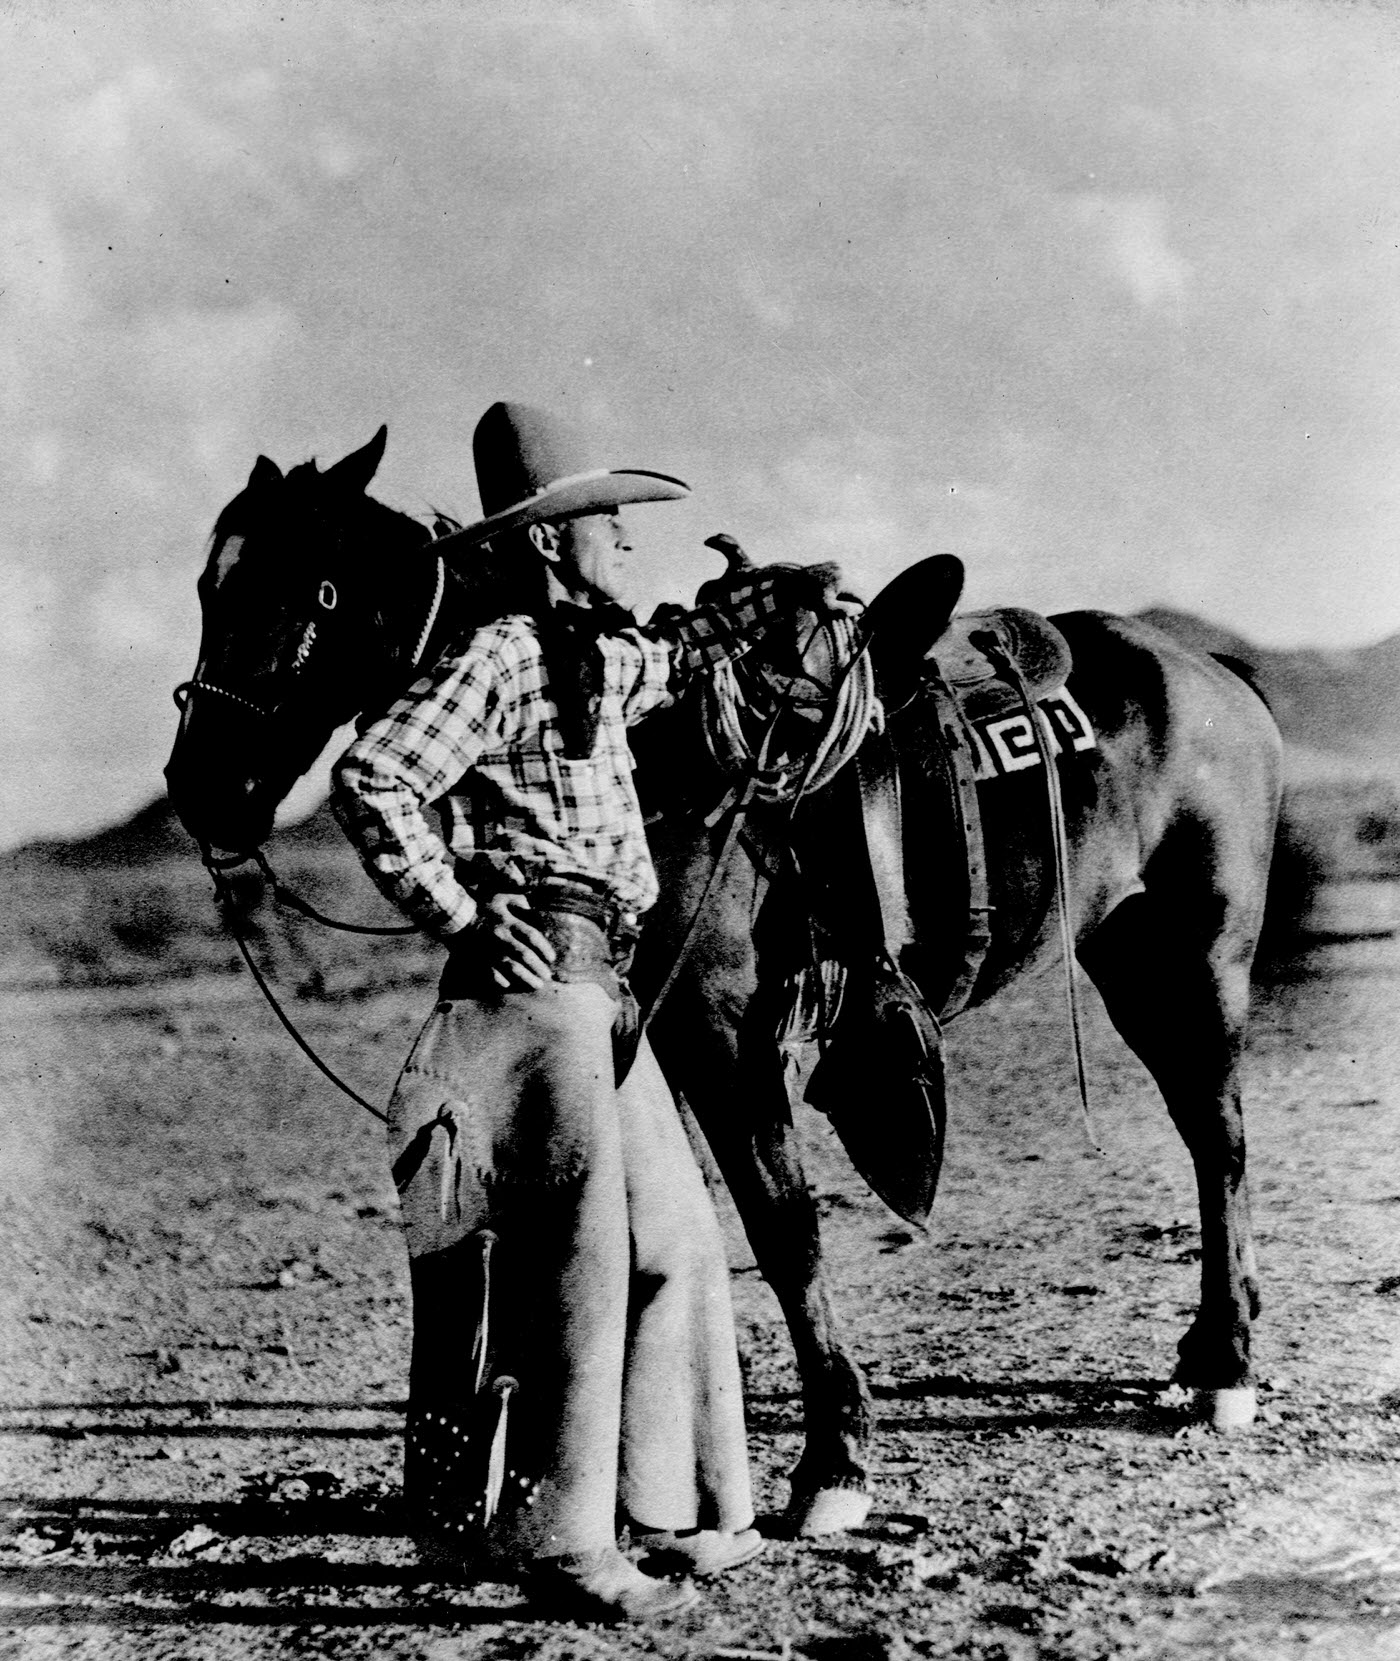 Cowboy and His Horse, 1900s